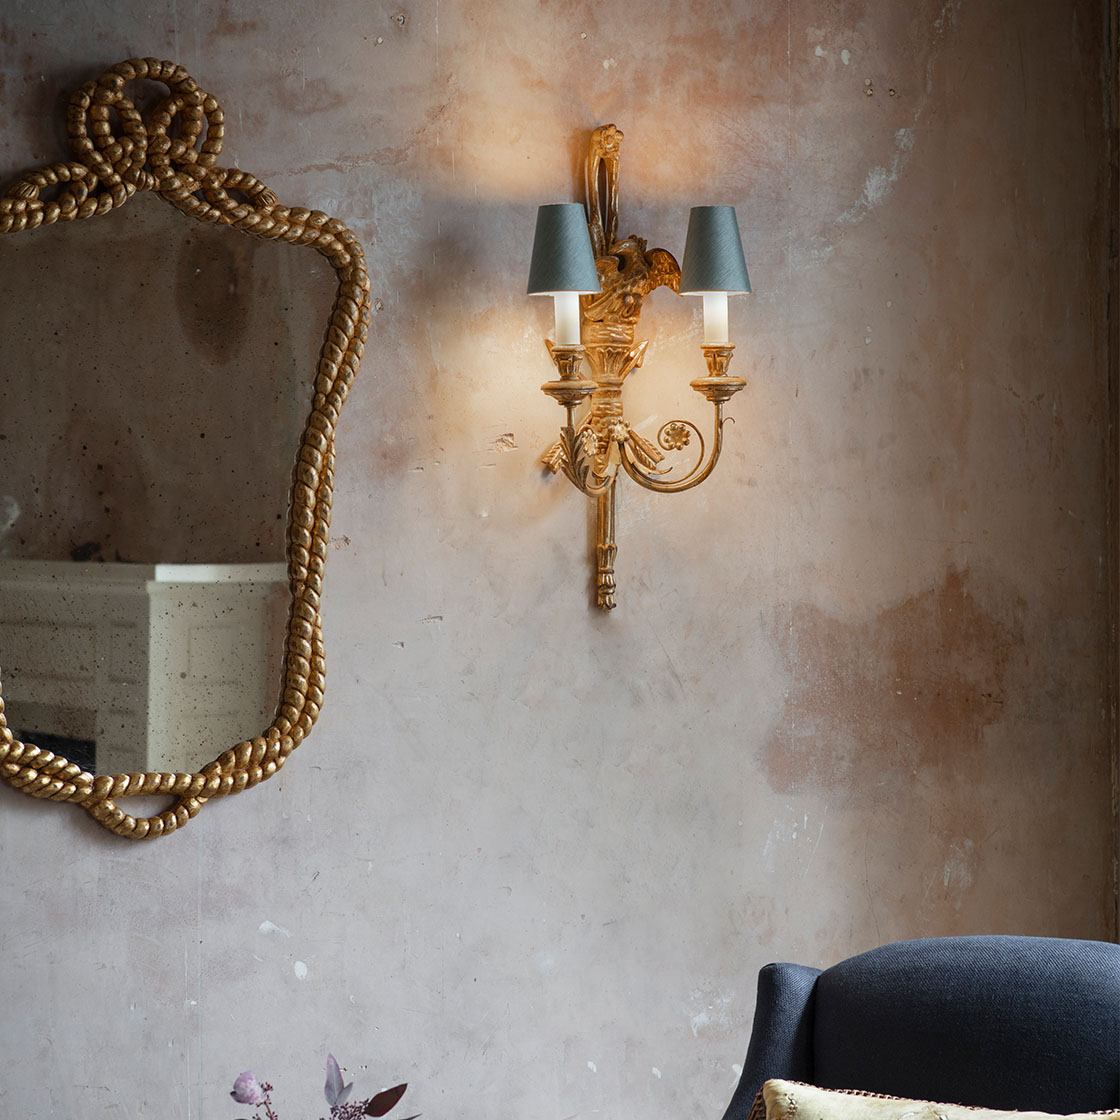 Nelson mirror in Burnt gold with Regency light in Burnt gold - Beaumont & Fletcher